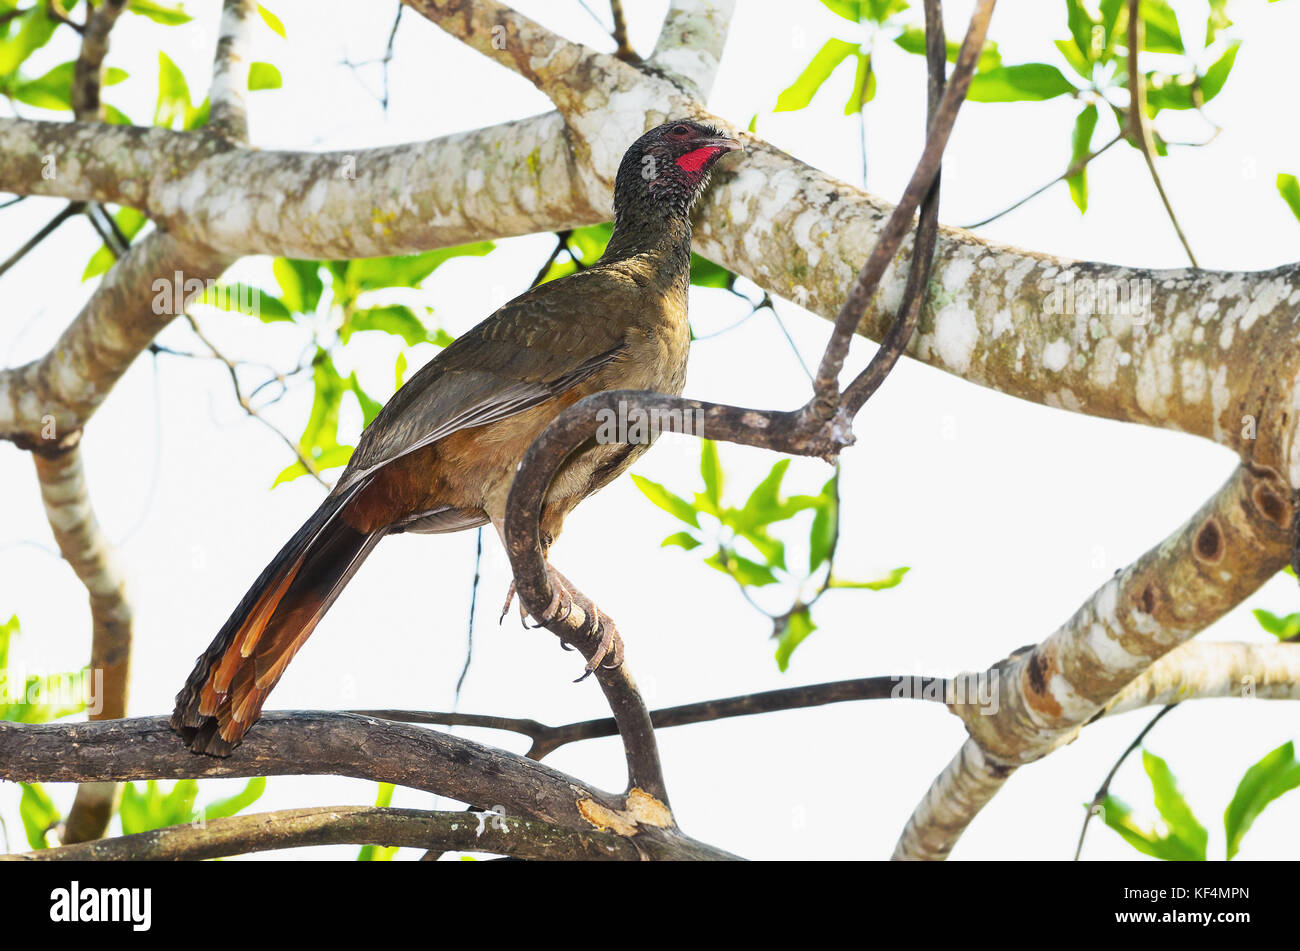 Ortalis guttata bird, known as Aracua-Pintado in Brazil. Bird with red stripes in the throat from Pantanal, Brazil. Stock Photo